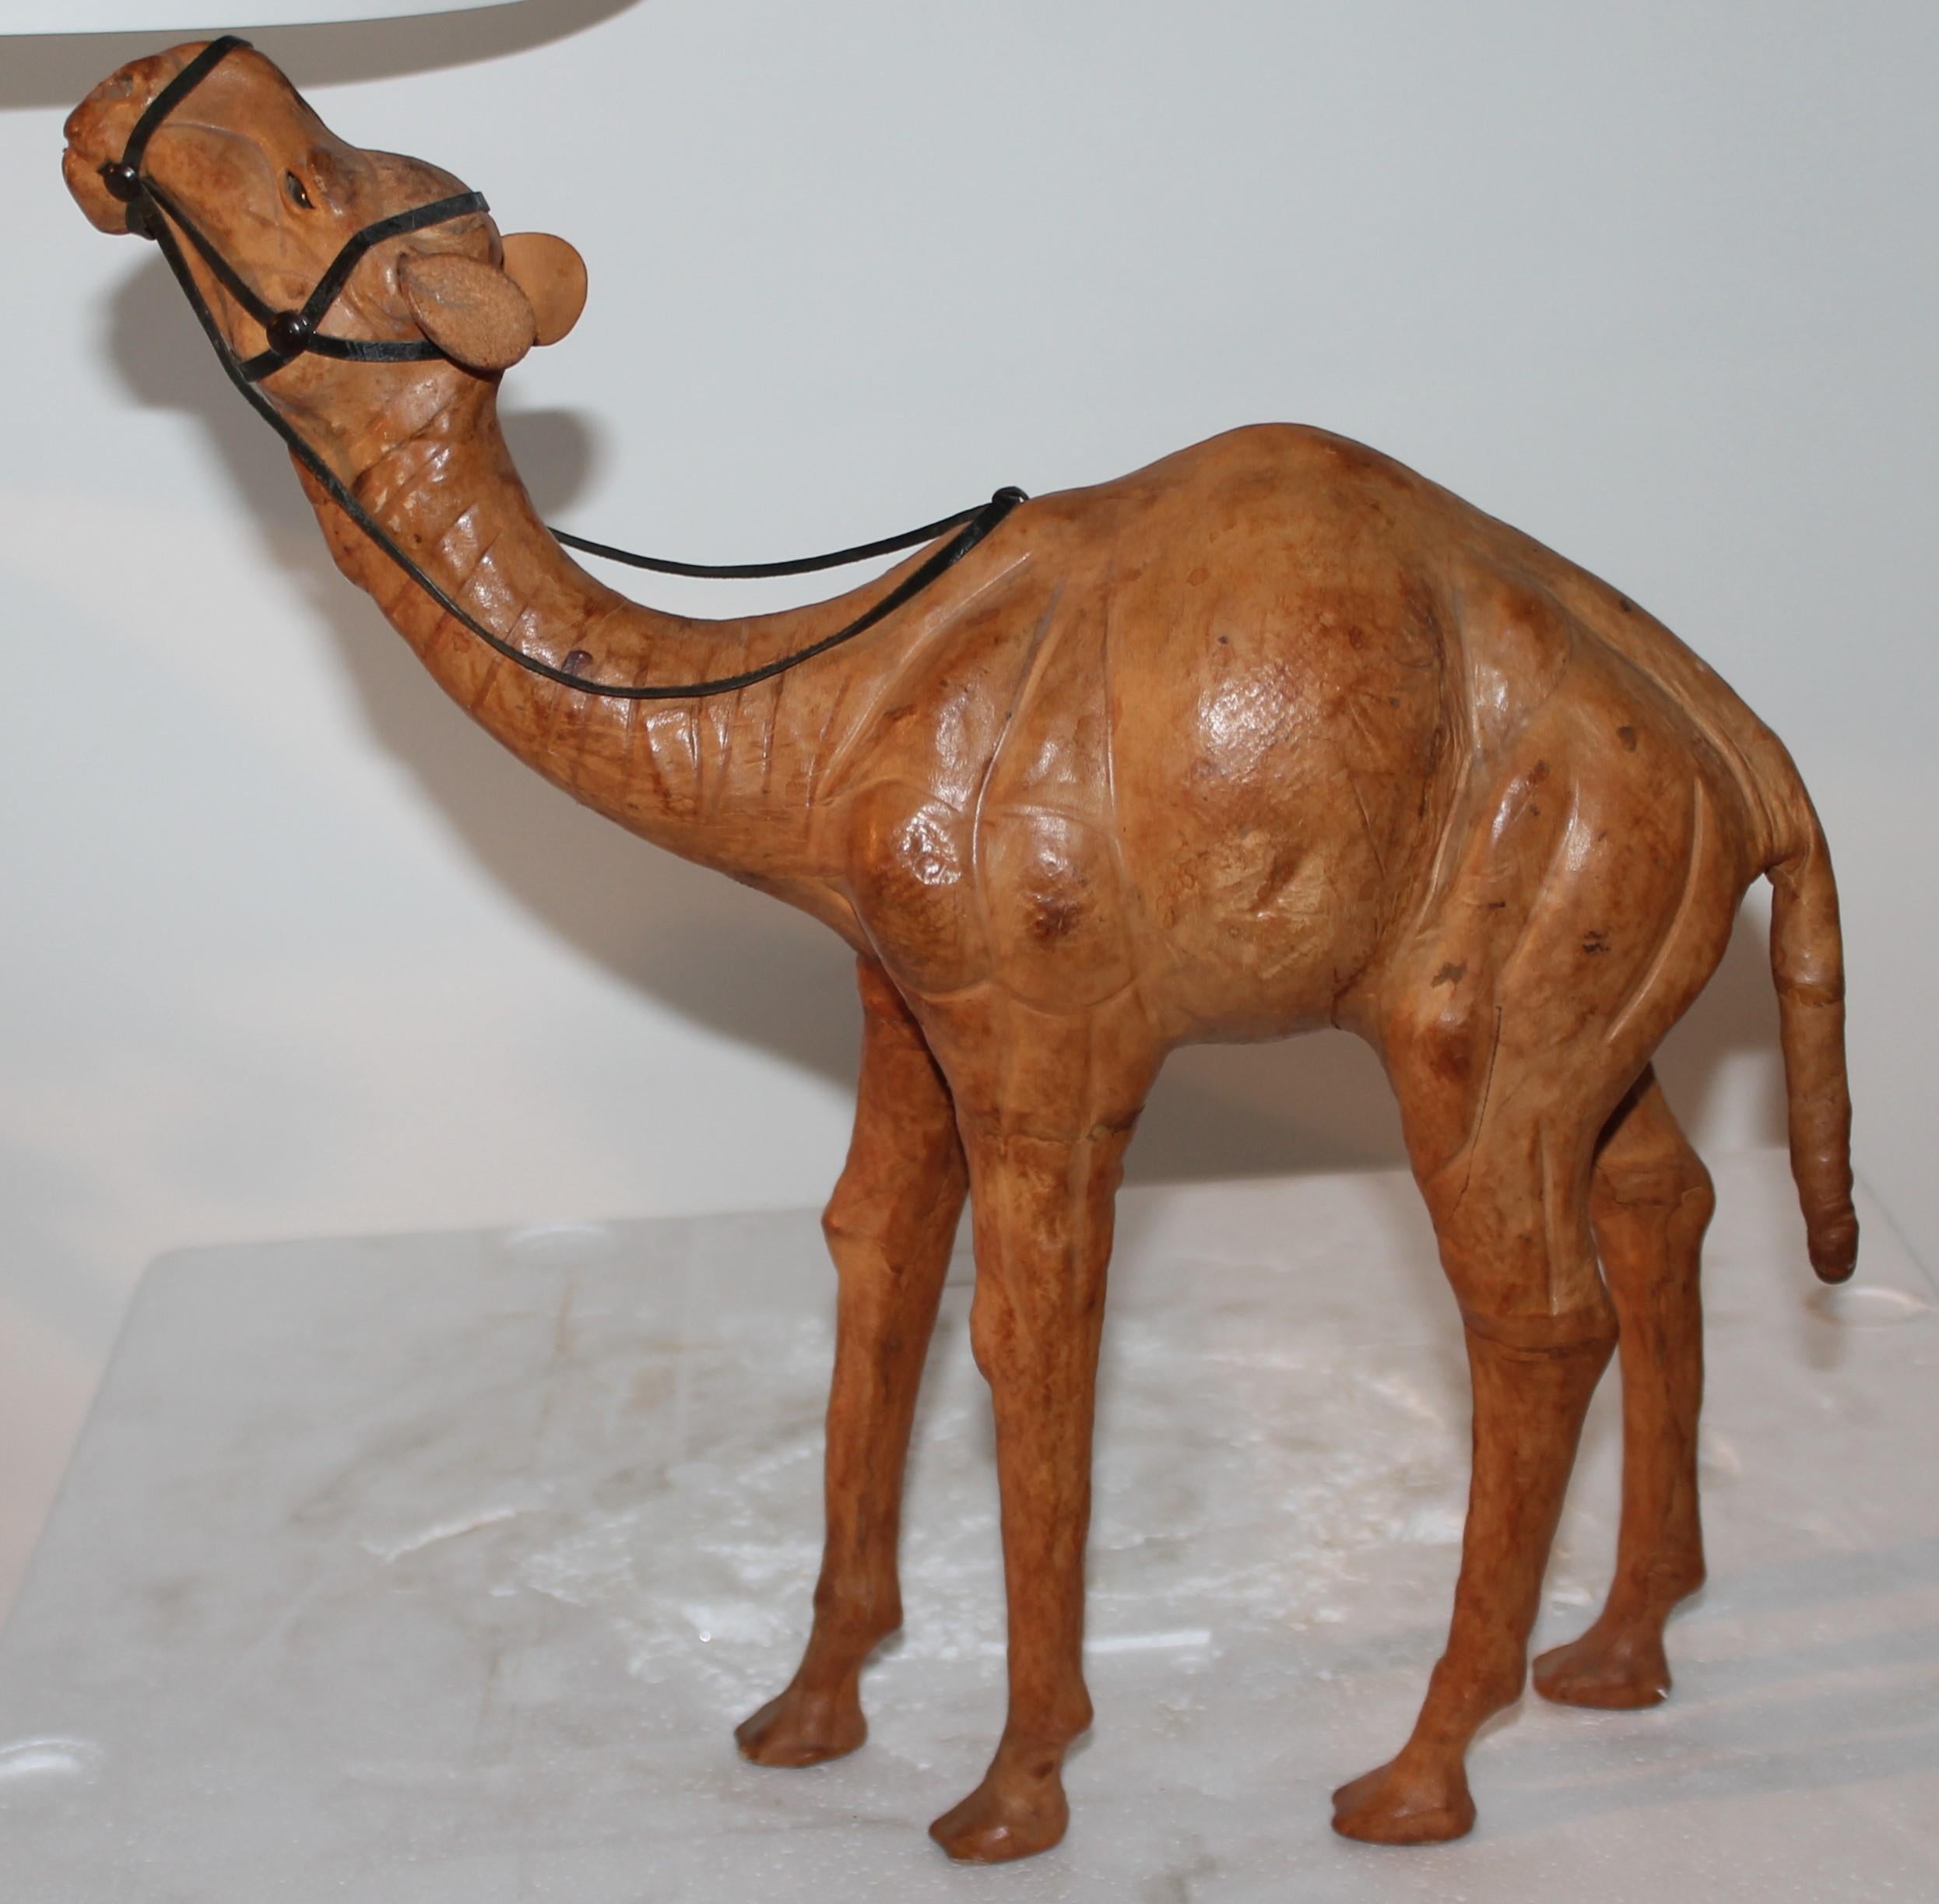 Leather Collection of the Three Wise Men's Camels For Sale